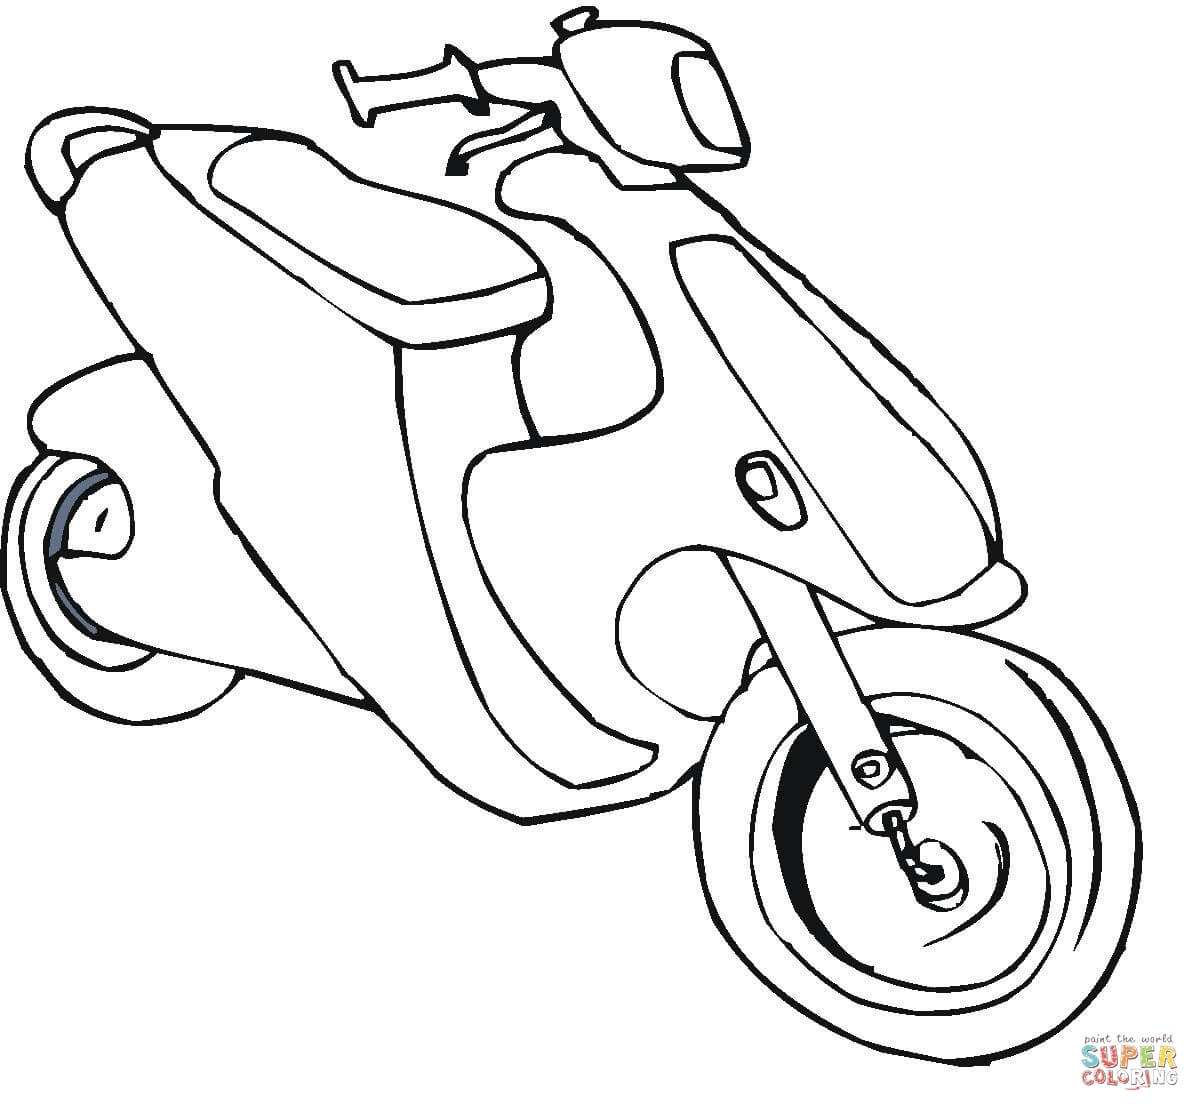 Motorcycles coloring pages | Free Coloring Pages